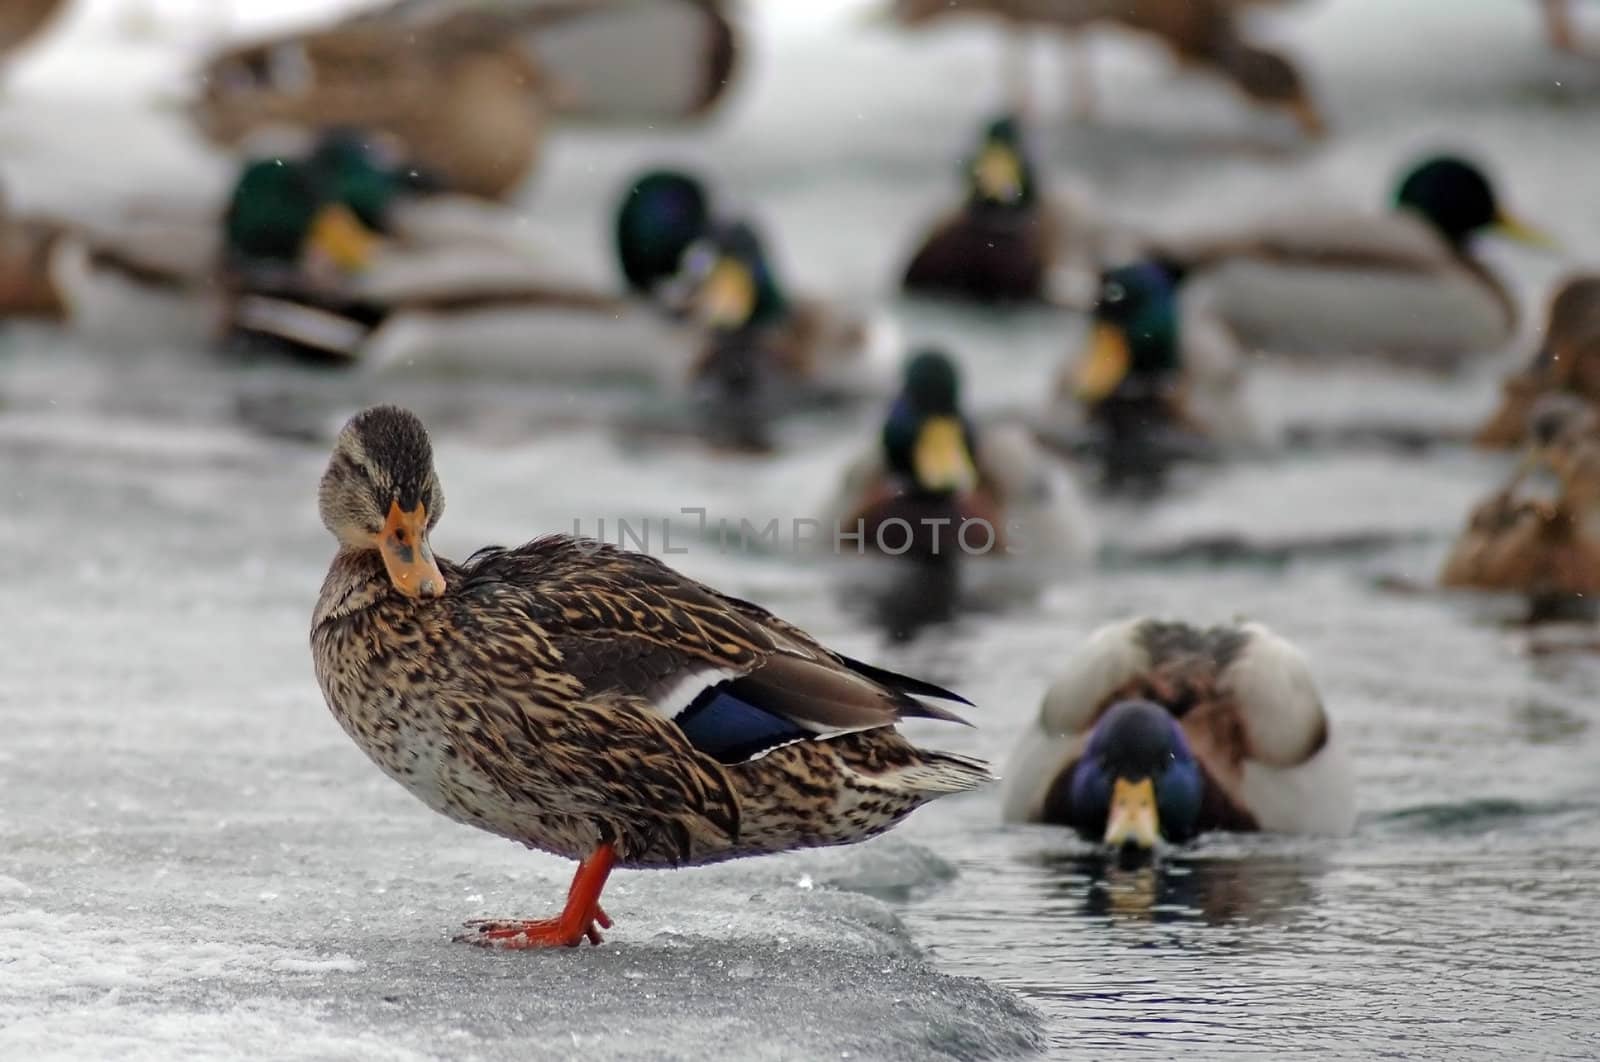 several duck swimming in pond during winter, one duck standing on ice